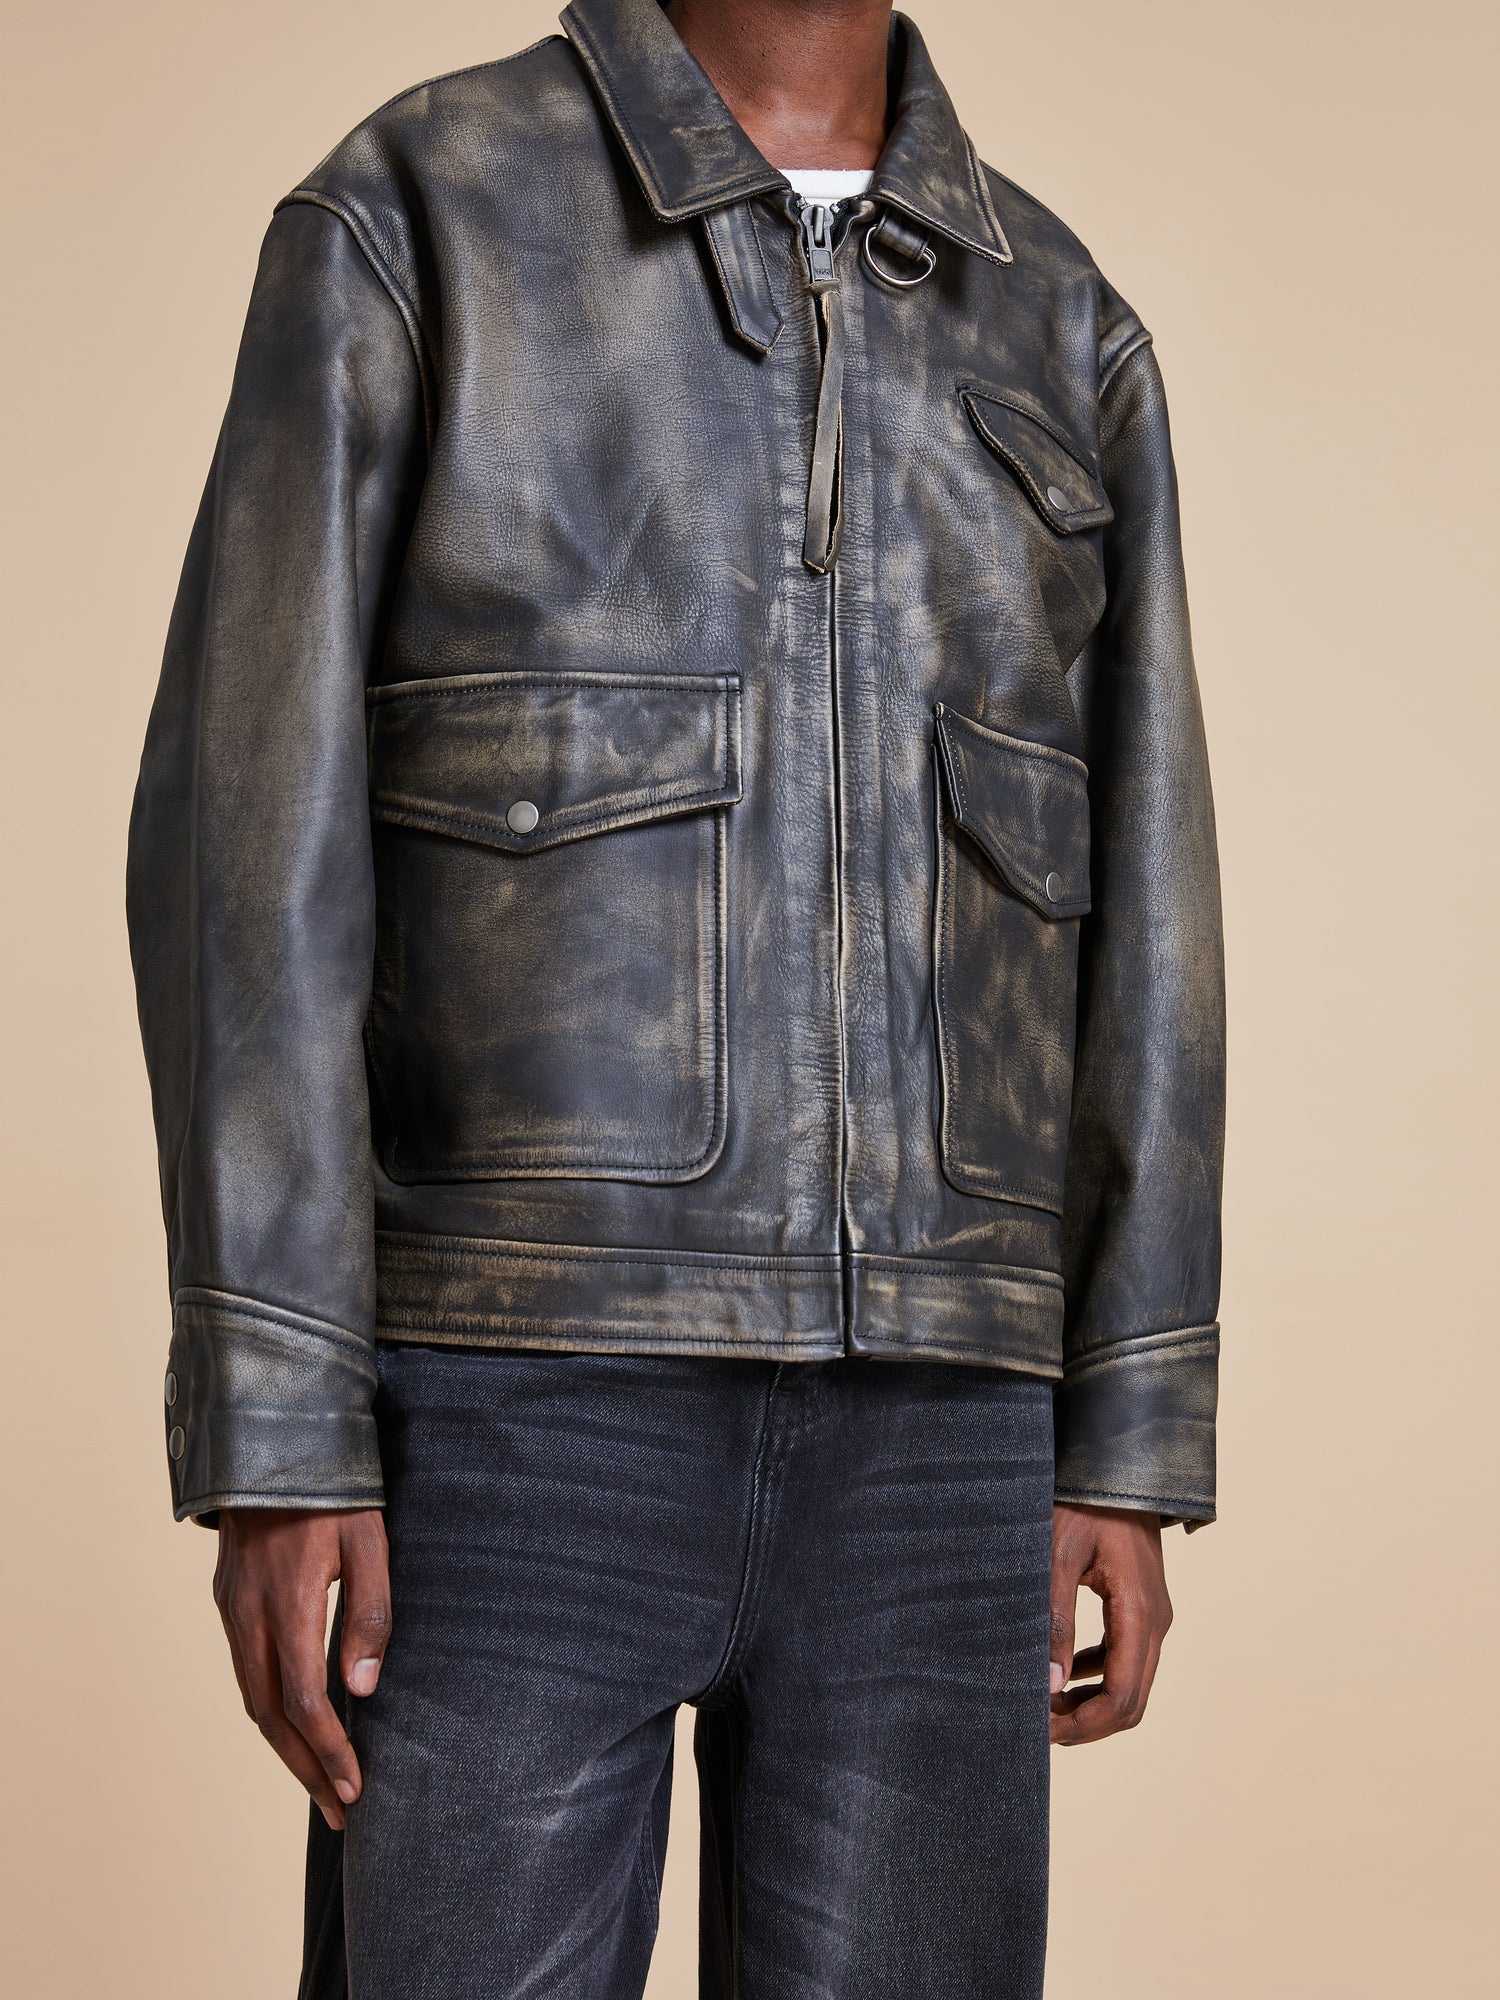 A man wearing a Found Distressed Leather Pocket Jacket and jeans.